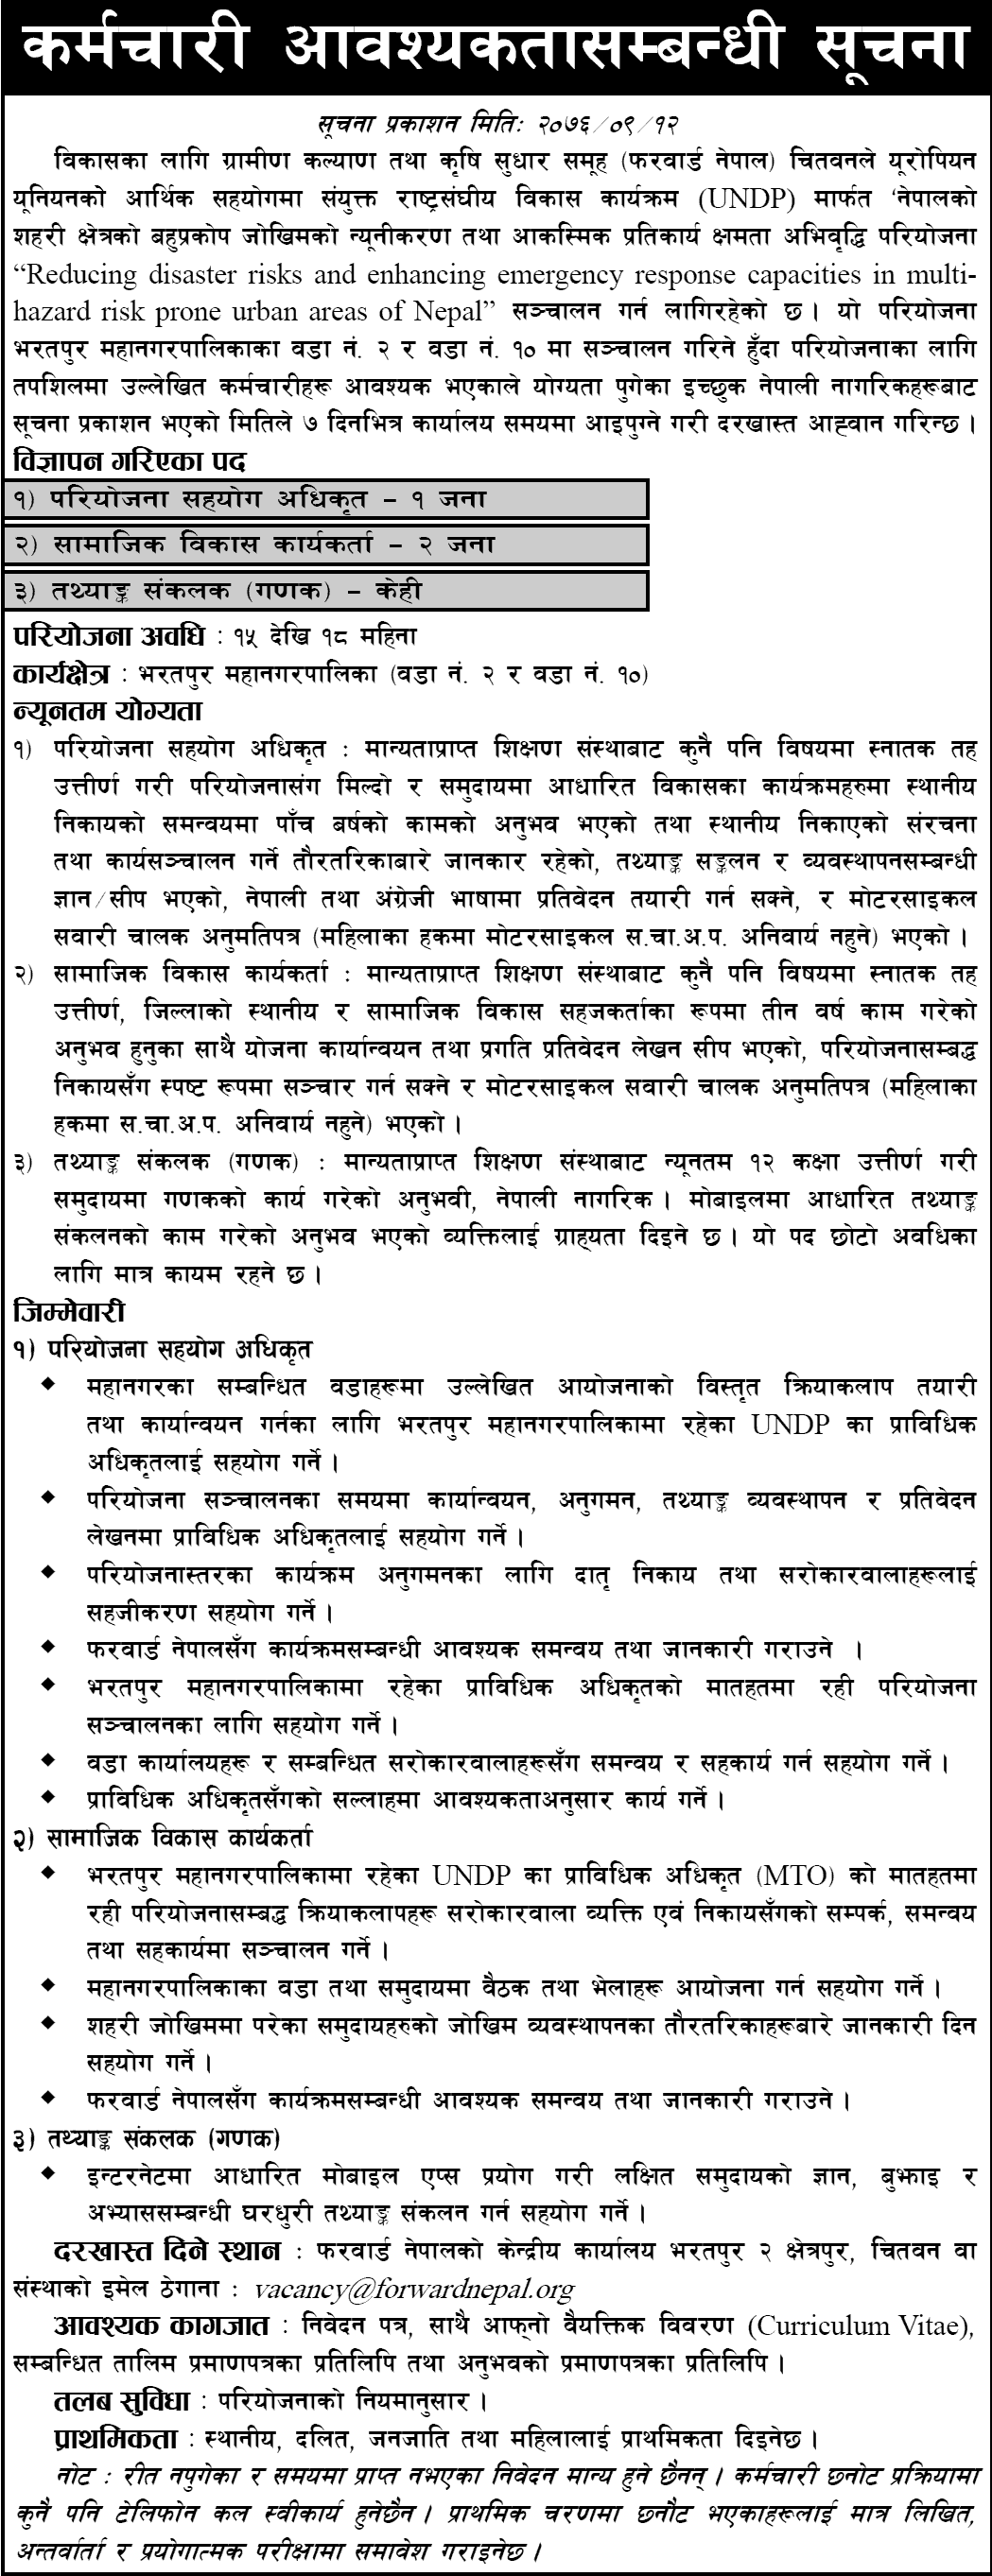 FORWARD Nepal Vacancy for Various Positions